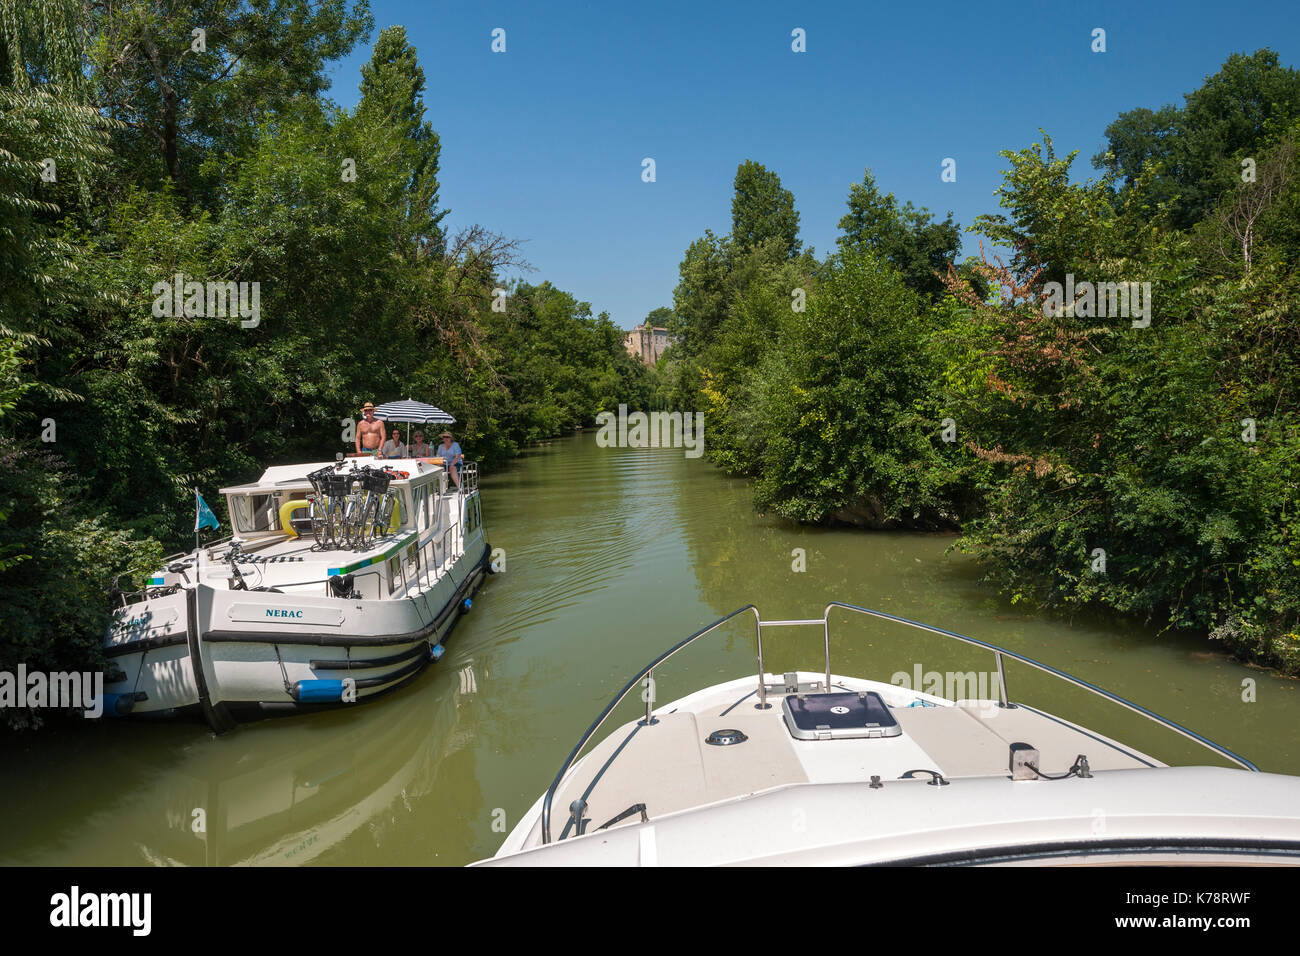 Canal boats on the Petite Baïse River in the Dordogne region of southwest France. Stock Photo